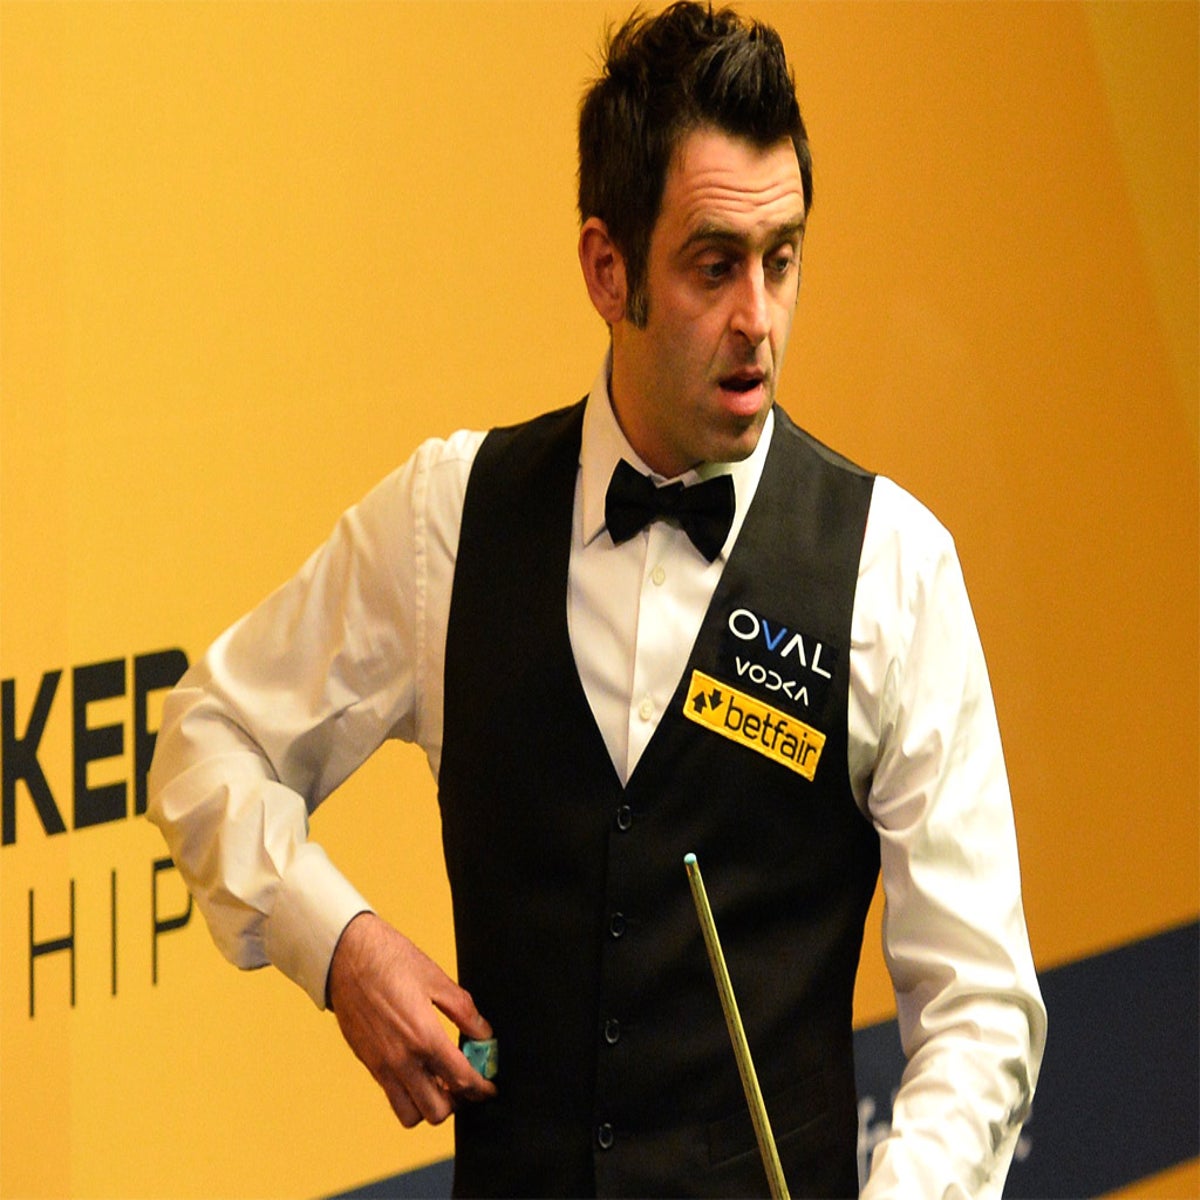 Ronnie O'Sullivan's retirement decision pays off as three world